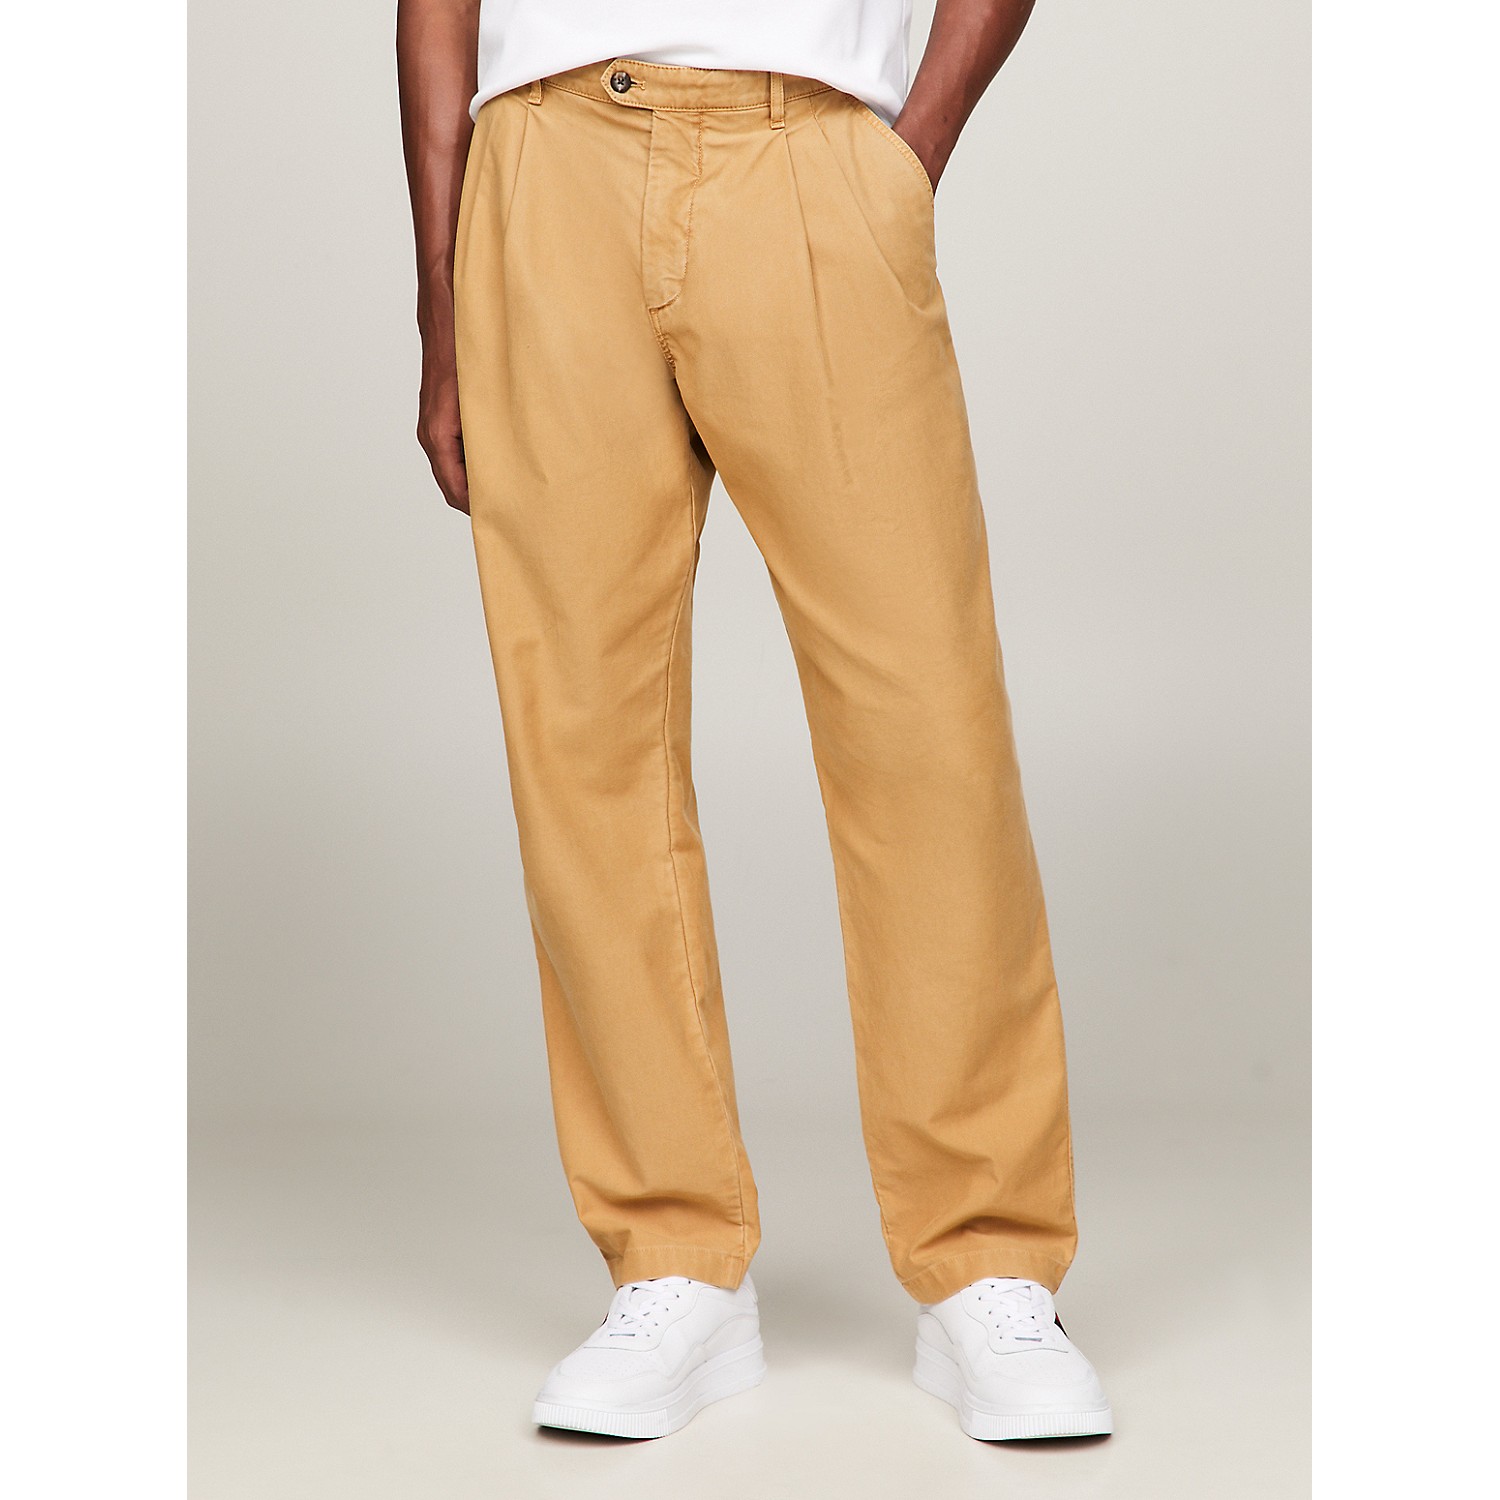 TOMMY HILFIGER Tapered Fit Garment-Dyed Chino